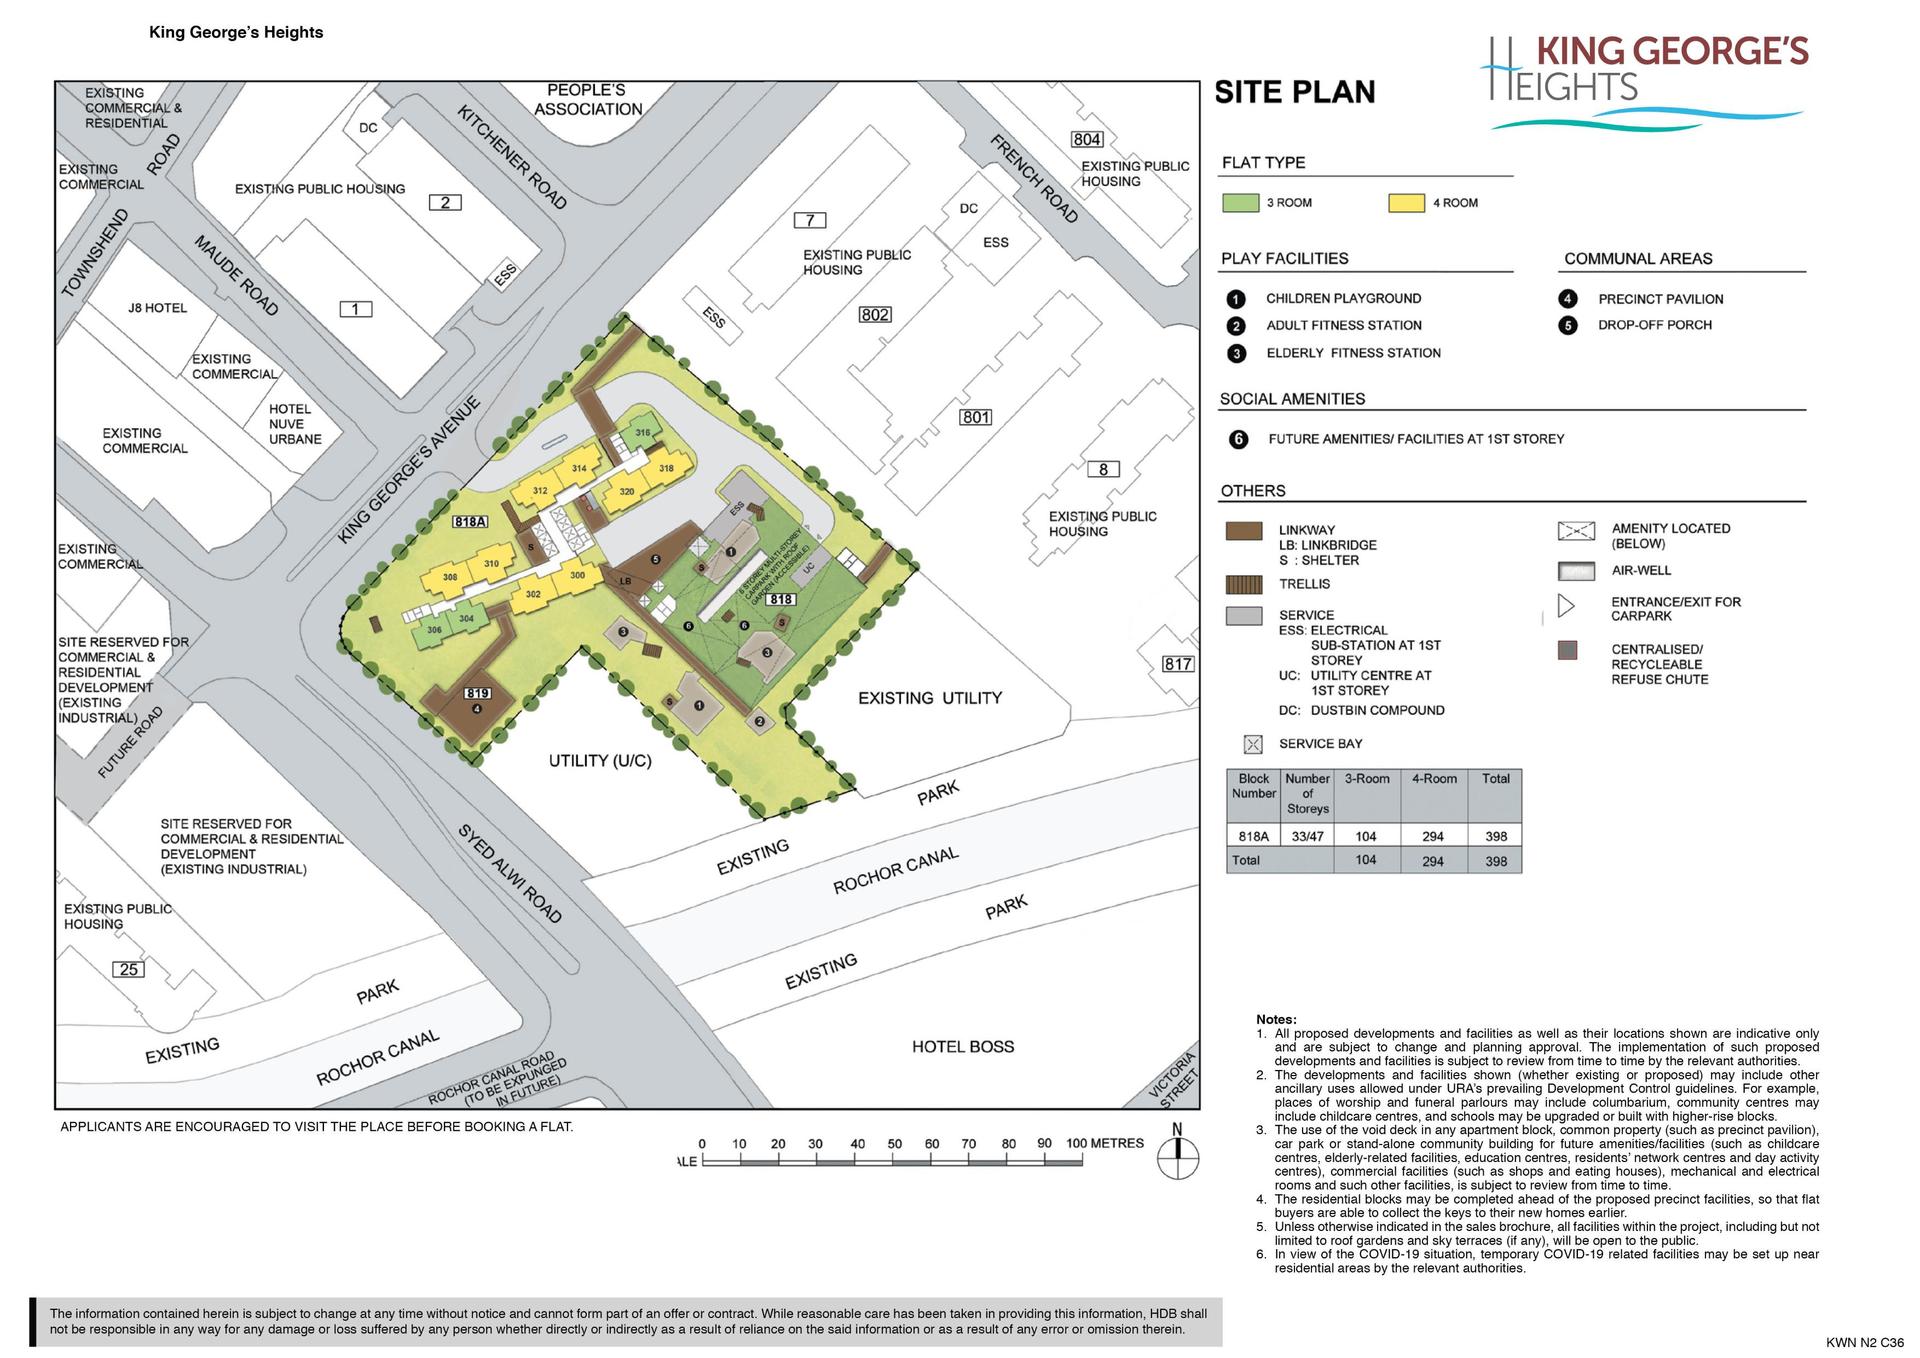 King George’s Heights - site plan